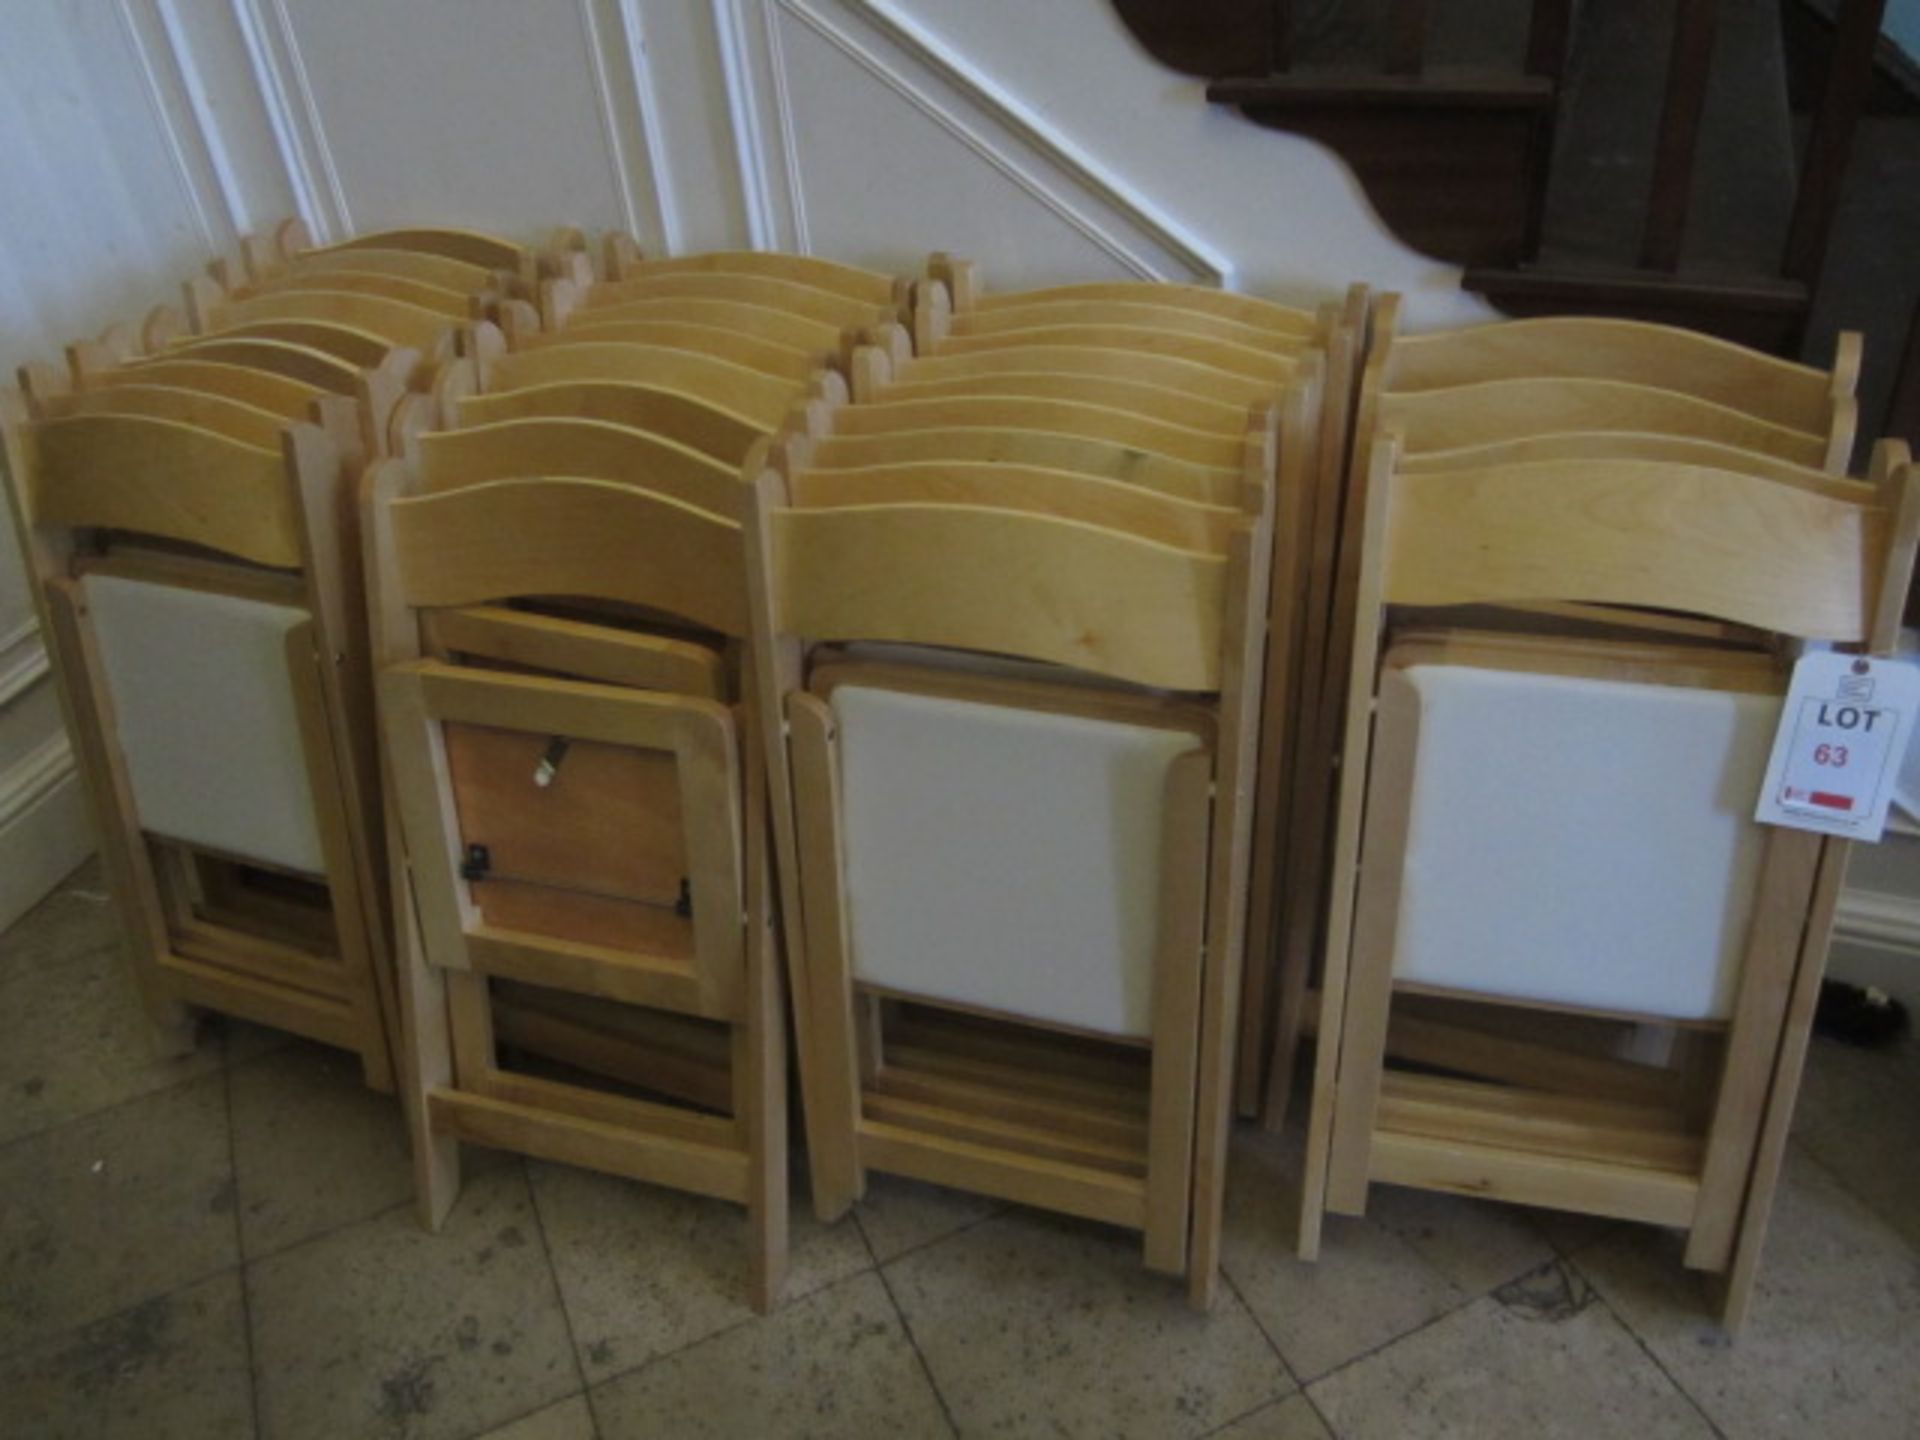 30 x folding lightwood dining chairs with leatherette seat cushions - Image 2 of 2